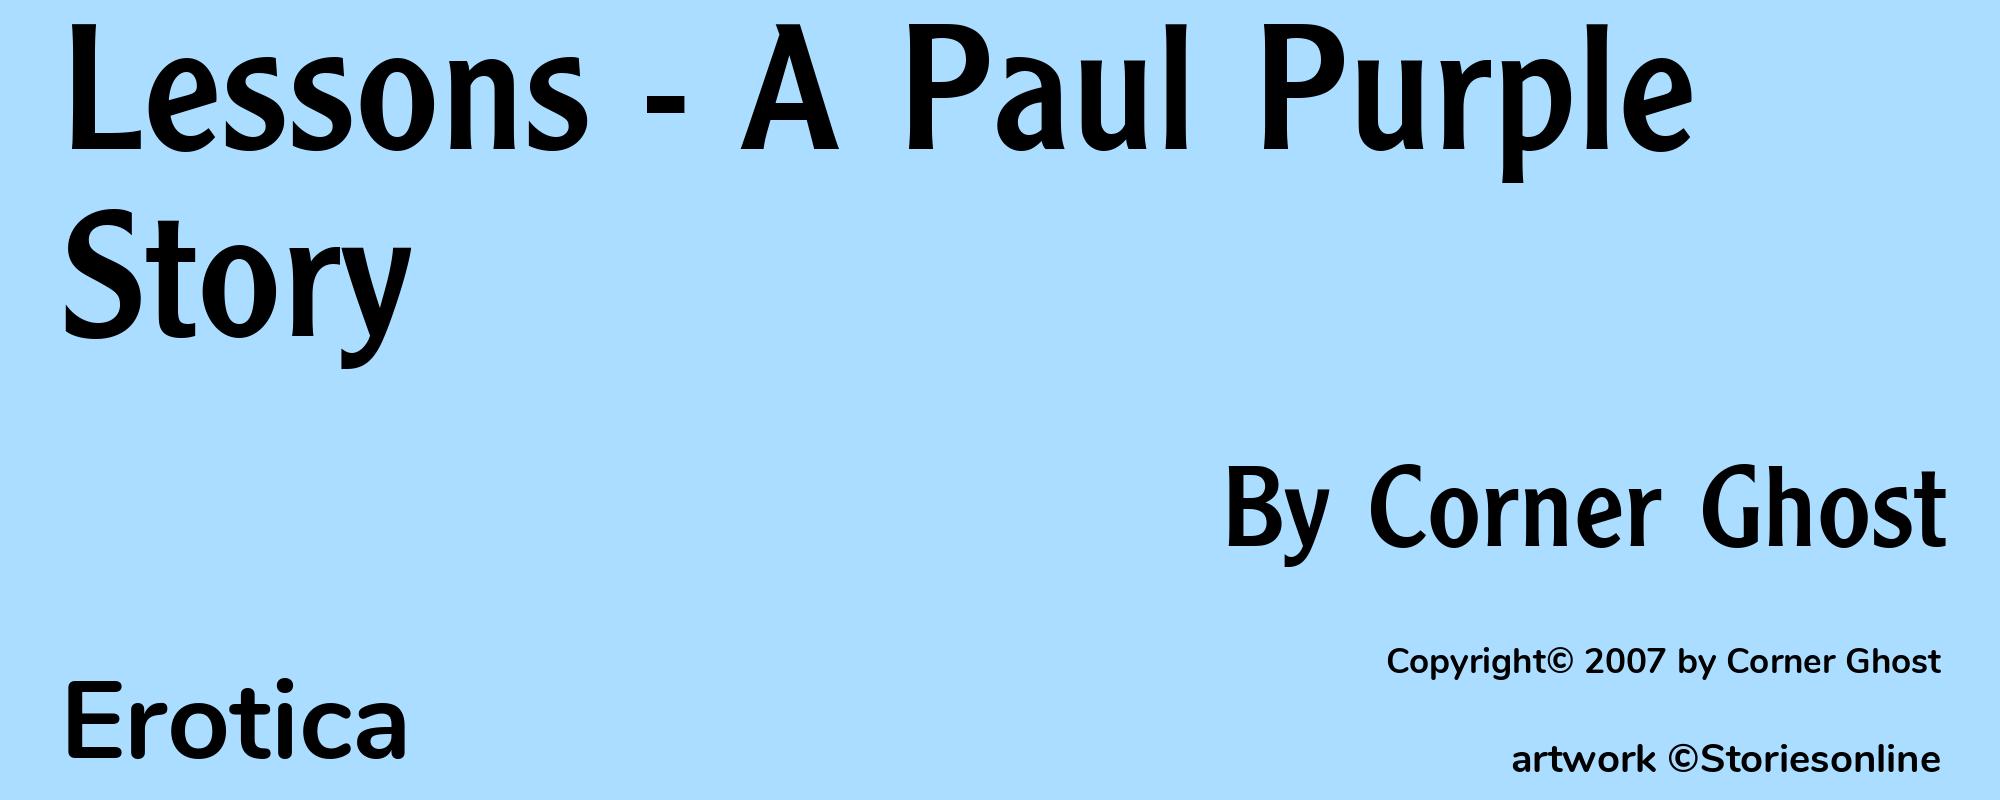 Lessons - A Paul Purple Story - Cover